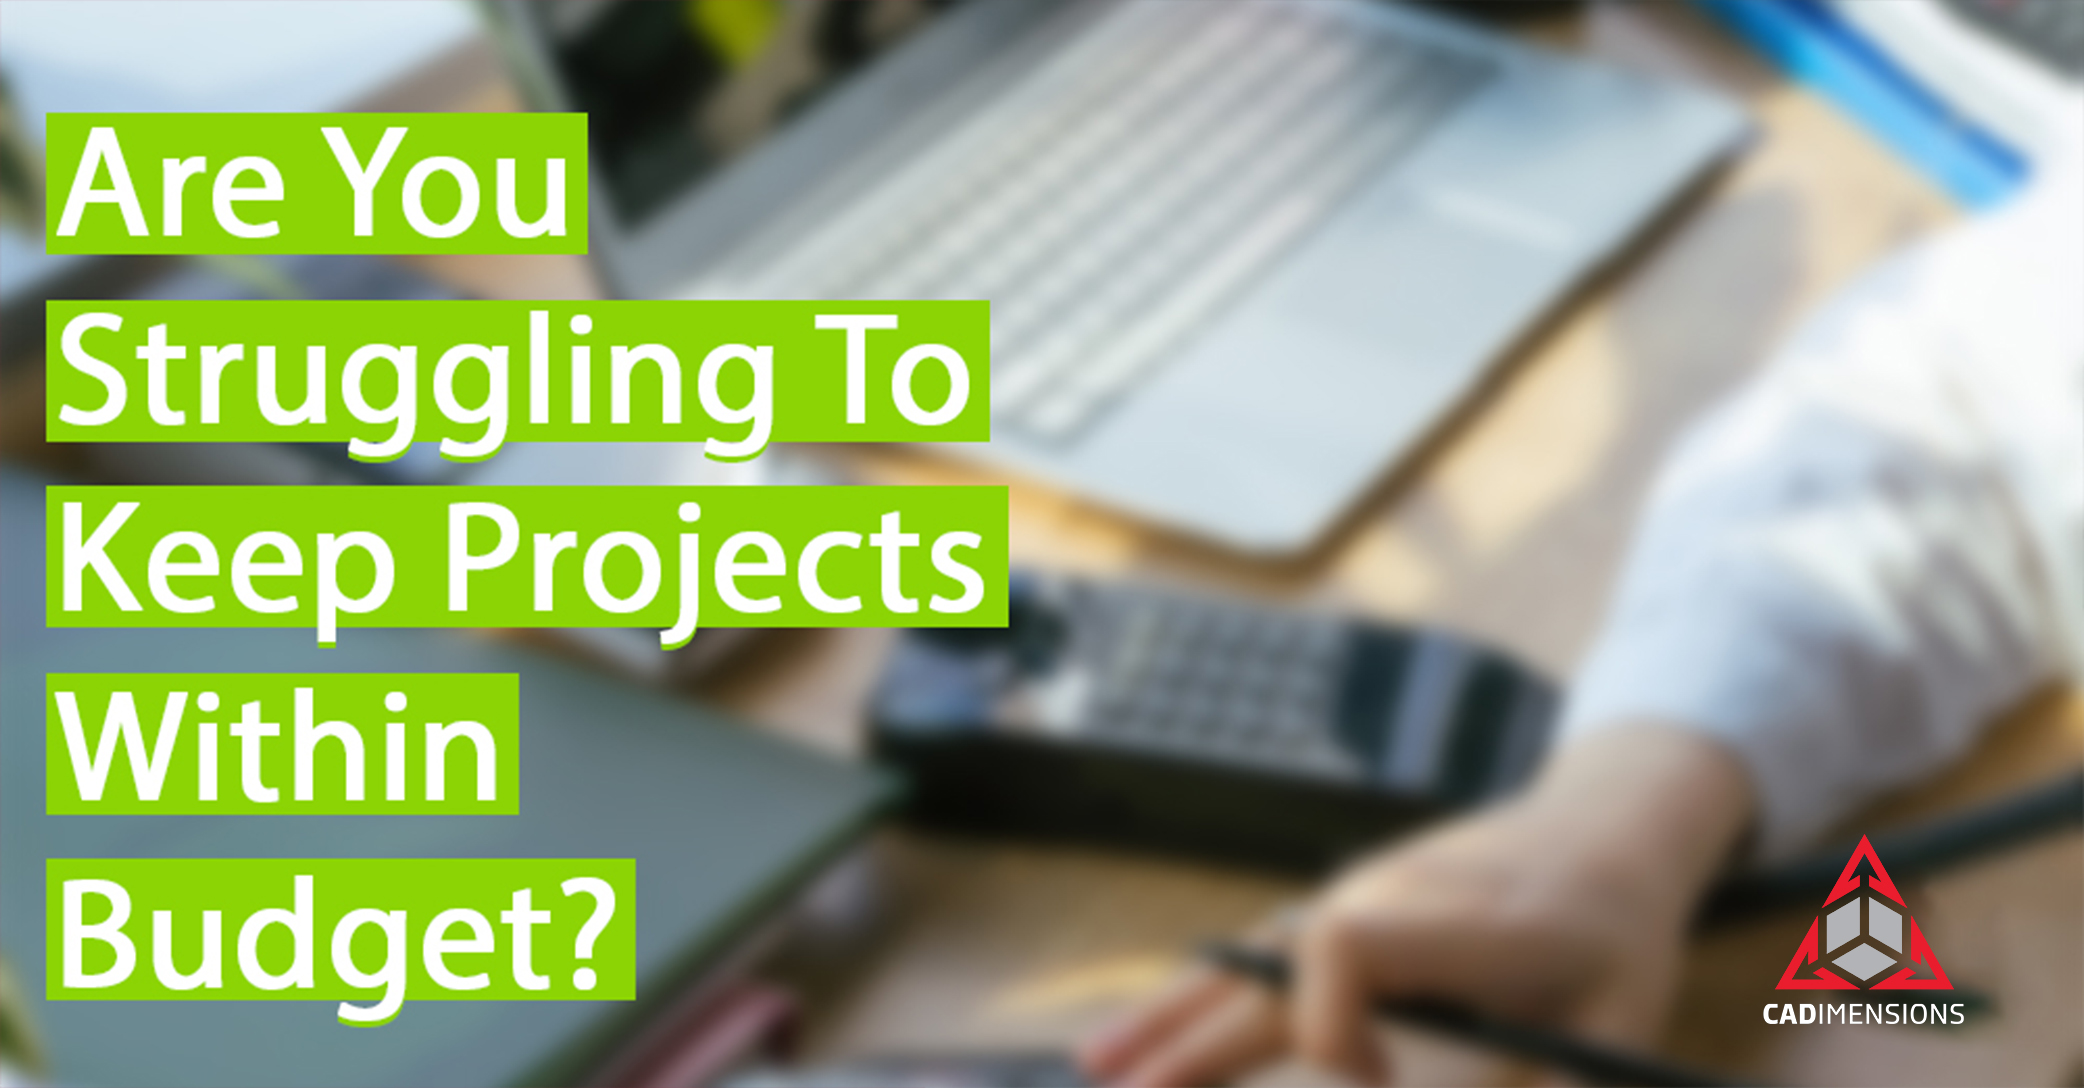 Are You Struggling To Keep Projects Within Budget?